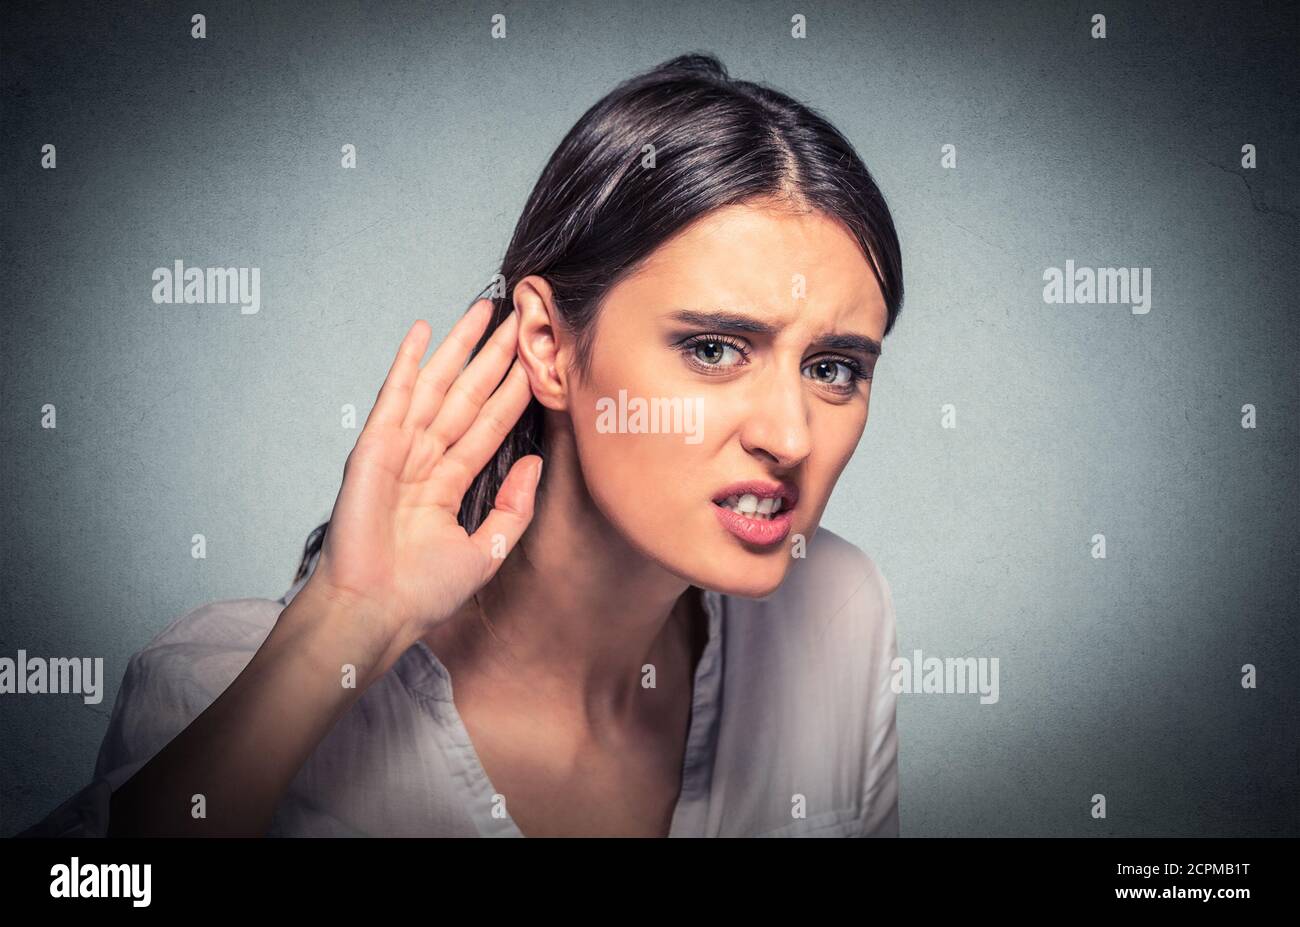 Closeup portrait young nosy woman hand to ear gesture trying carefully listens in on juicy gossip conversation isolated gray background. Human face ex Stock Photo